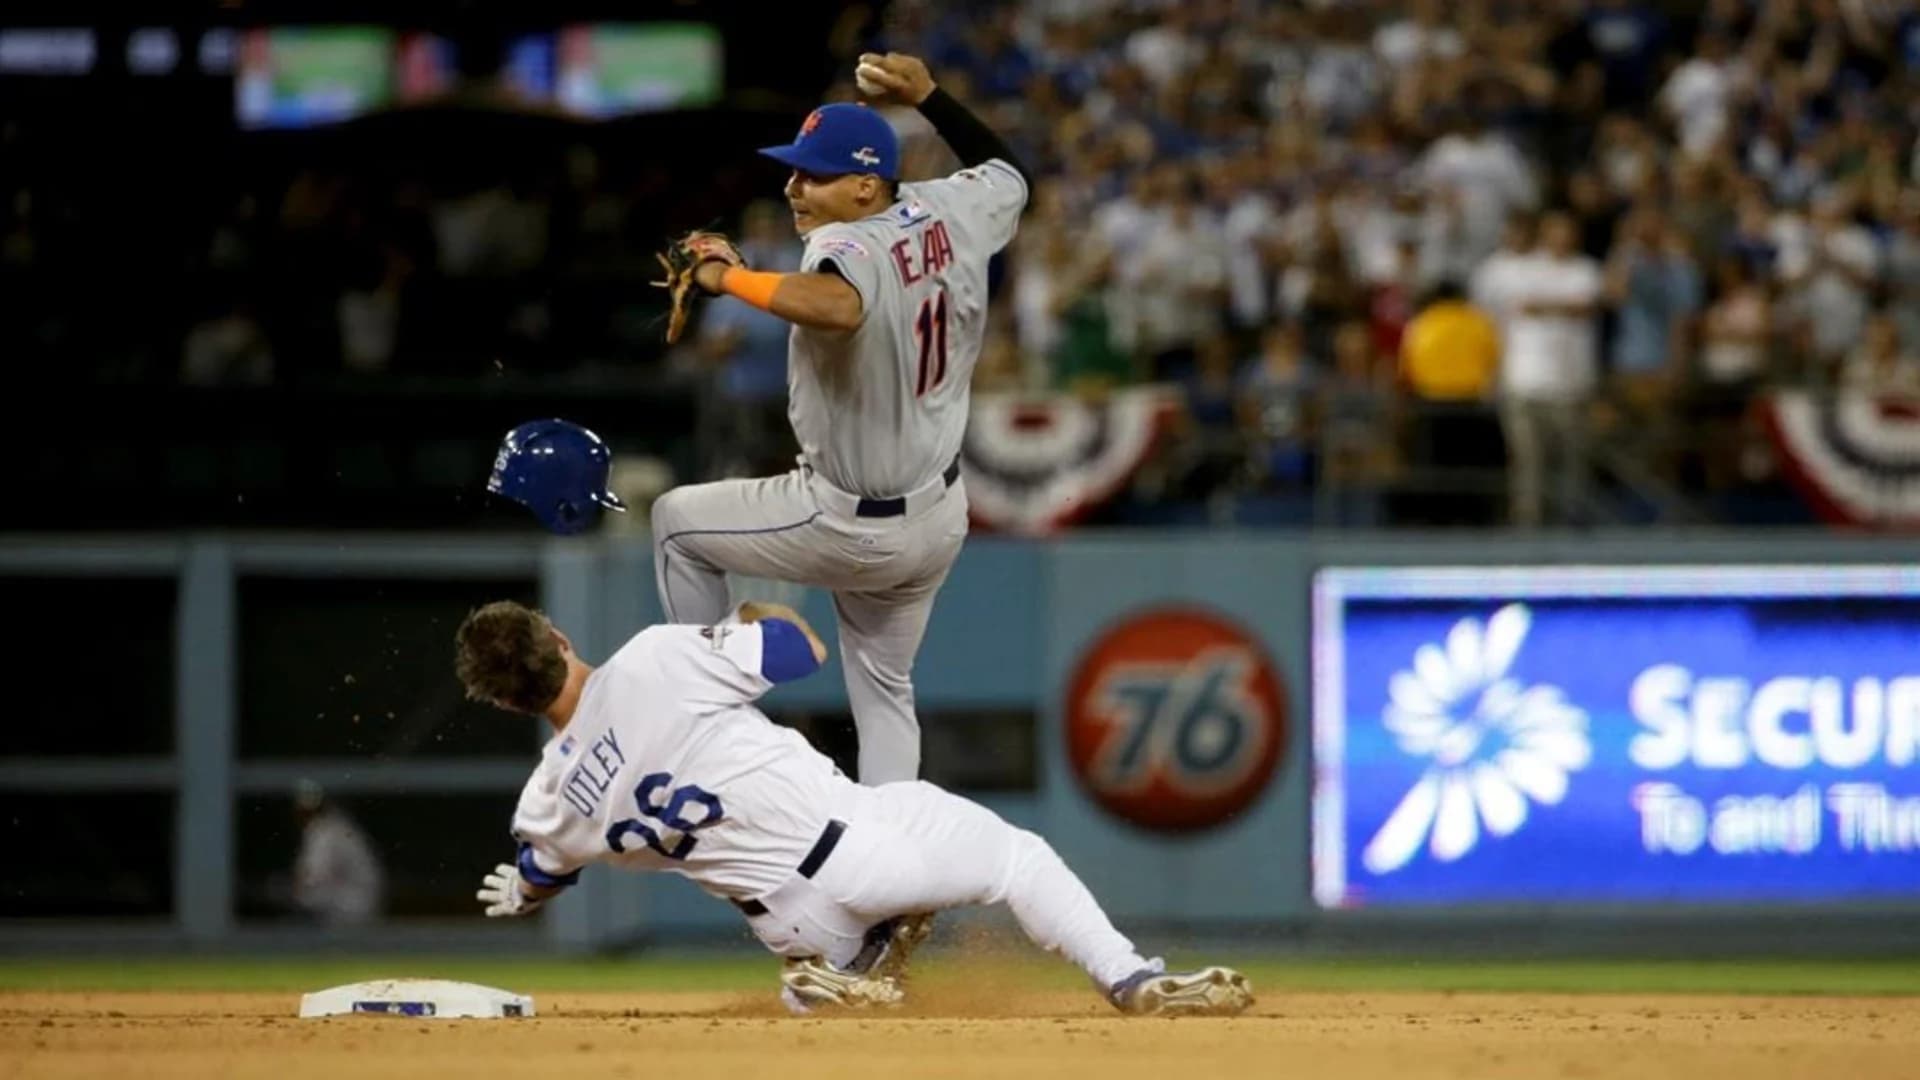 Ruben Tejada returns to the Mets nearly 4 years after infamous postseason injury